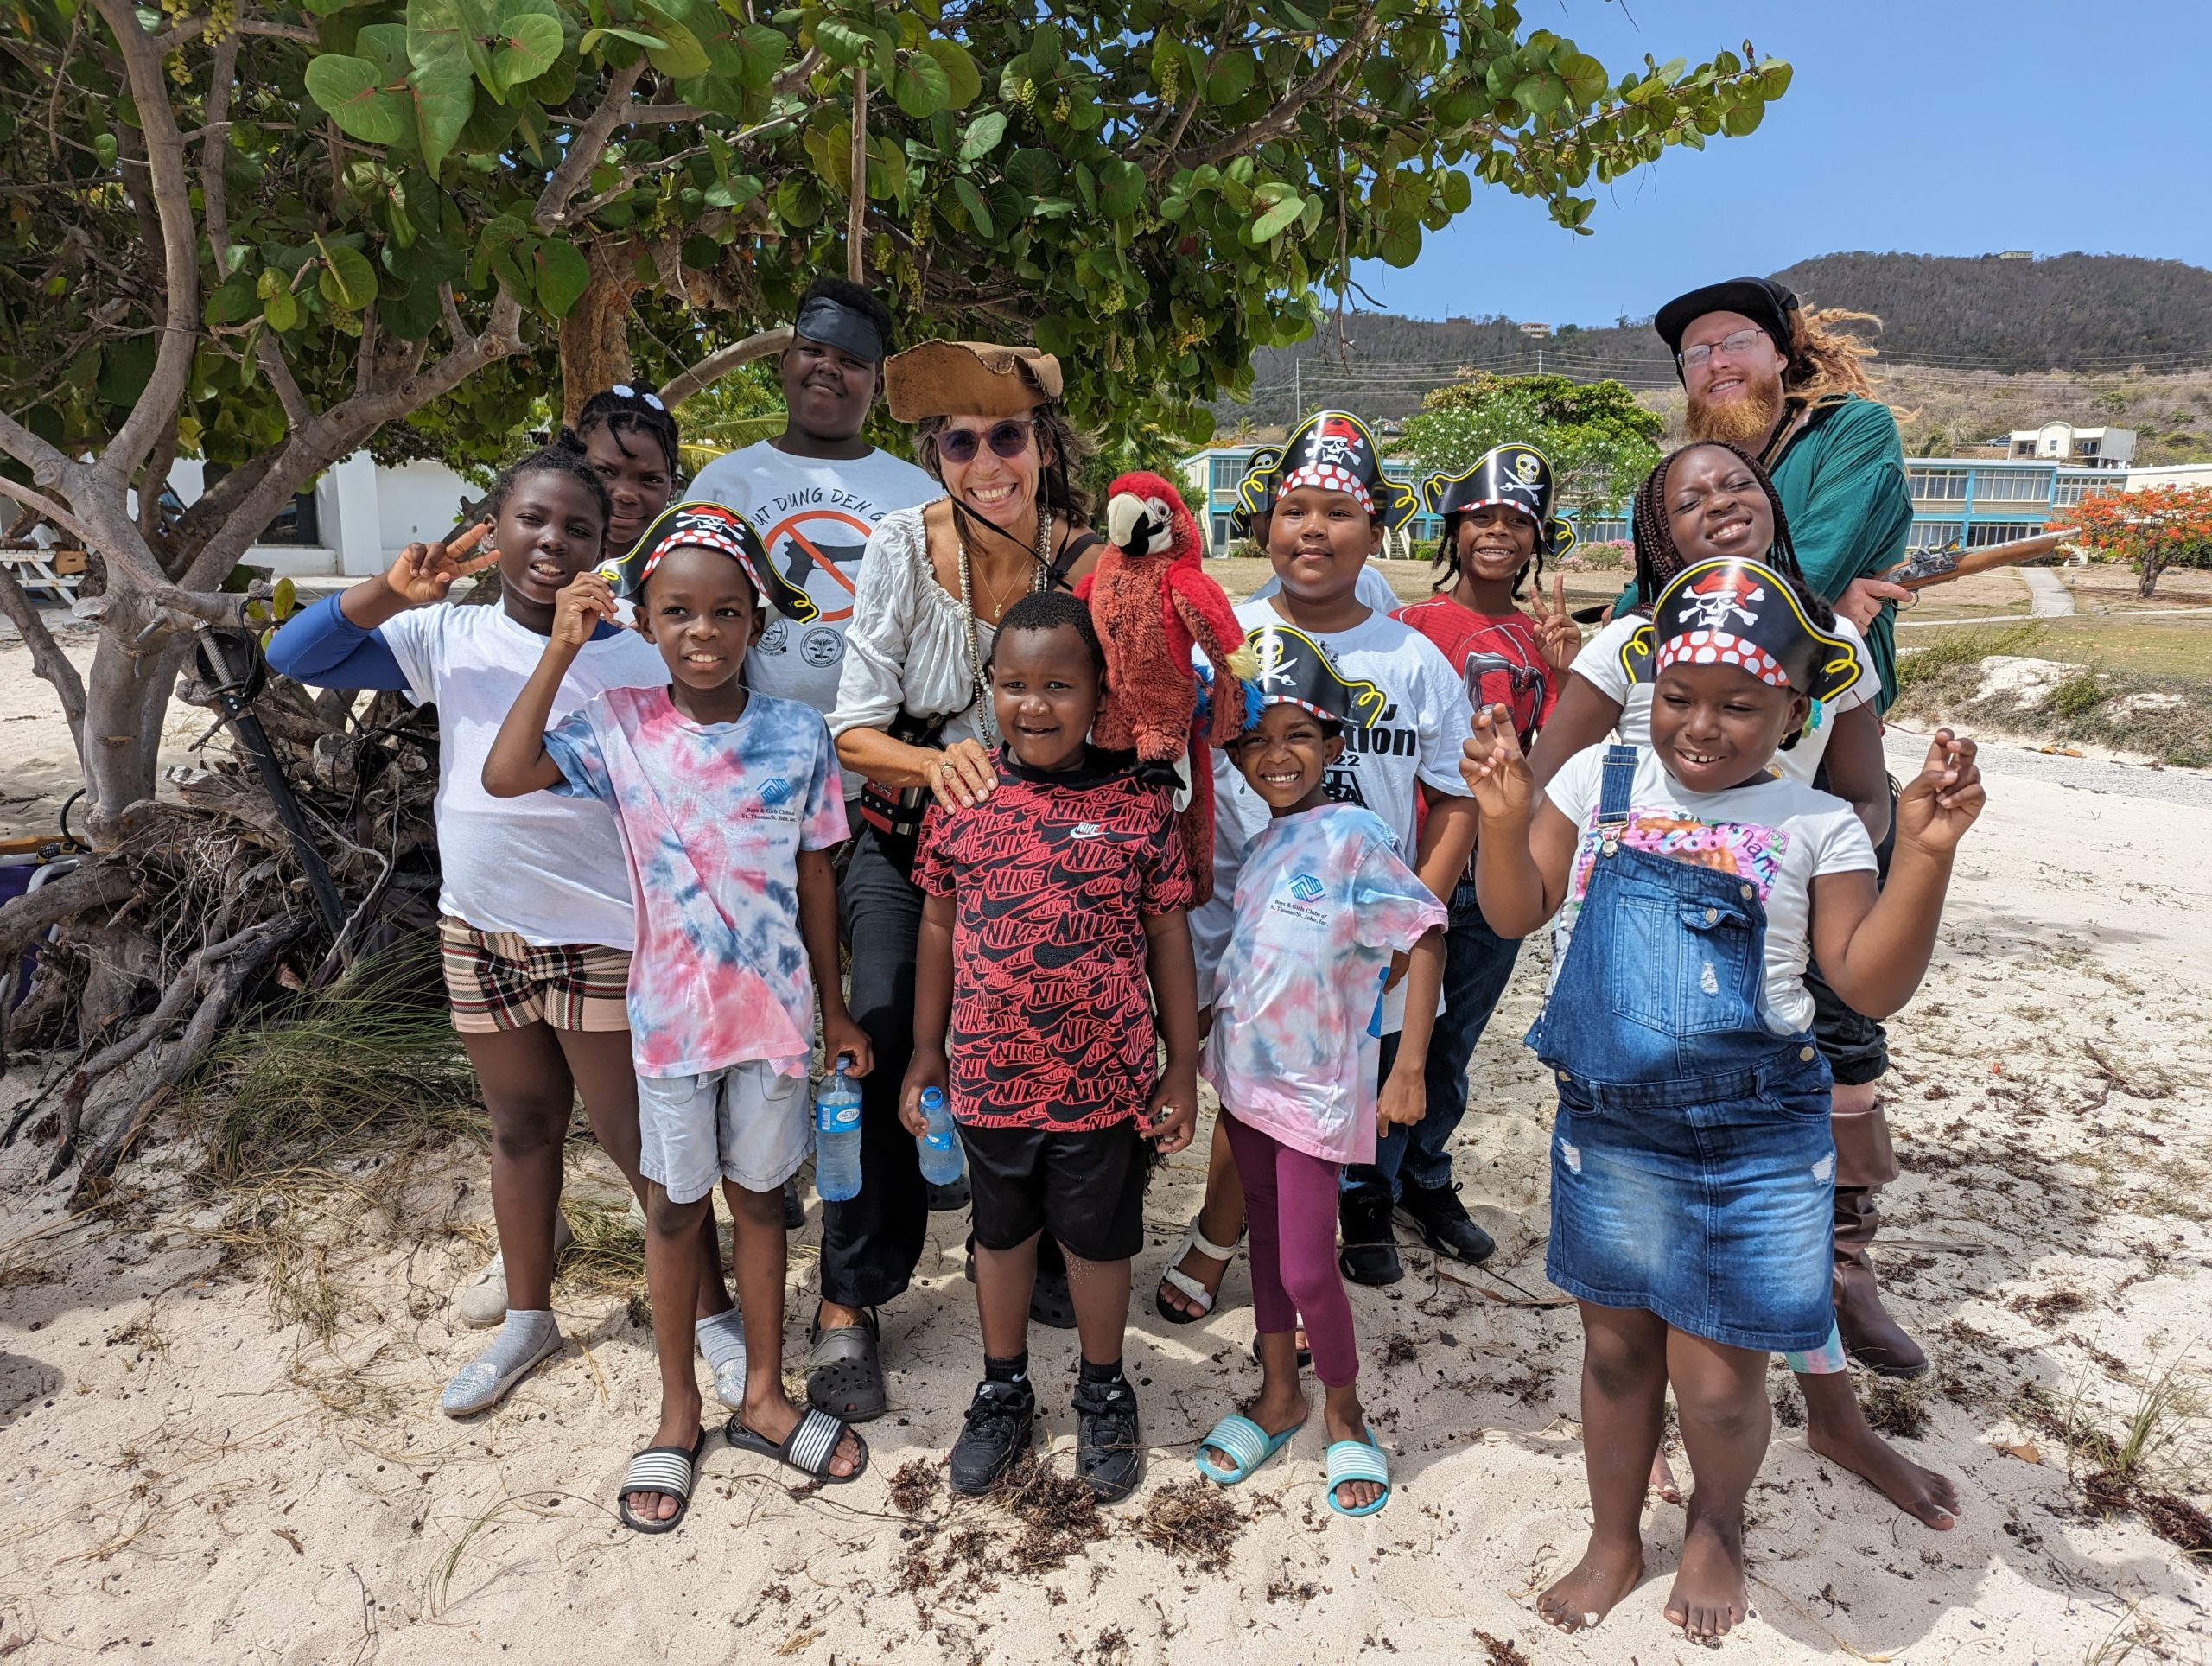 A group of children wearing paper pirate hats pose on a beach next to a mangrove tree with two adults dressed as pirates.